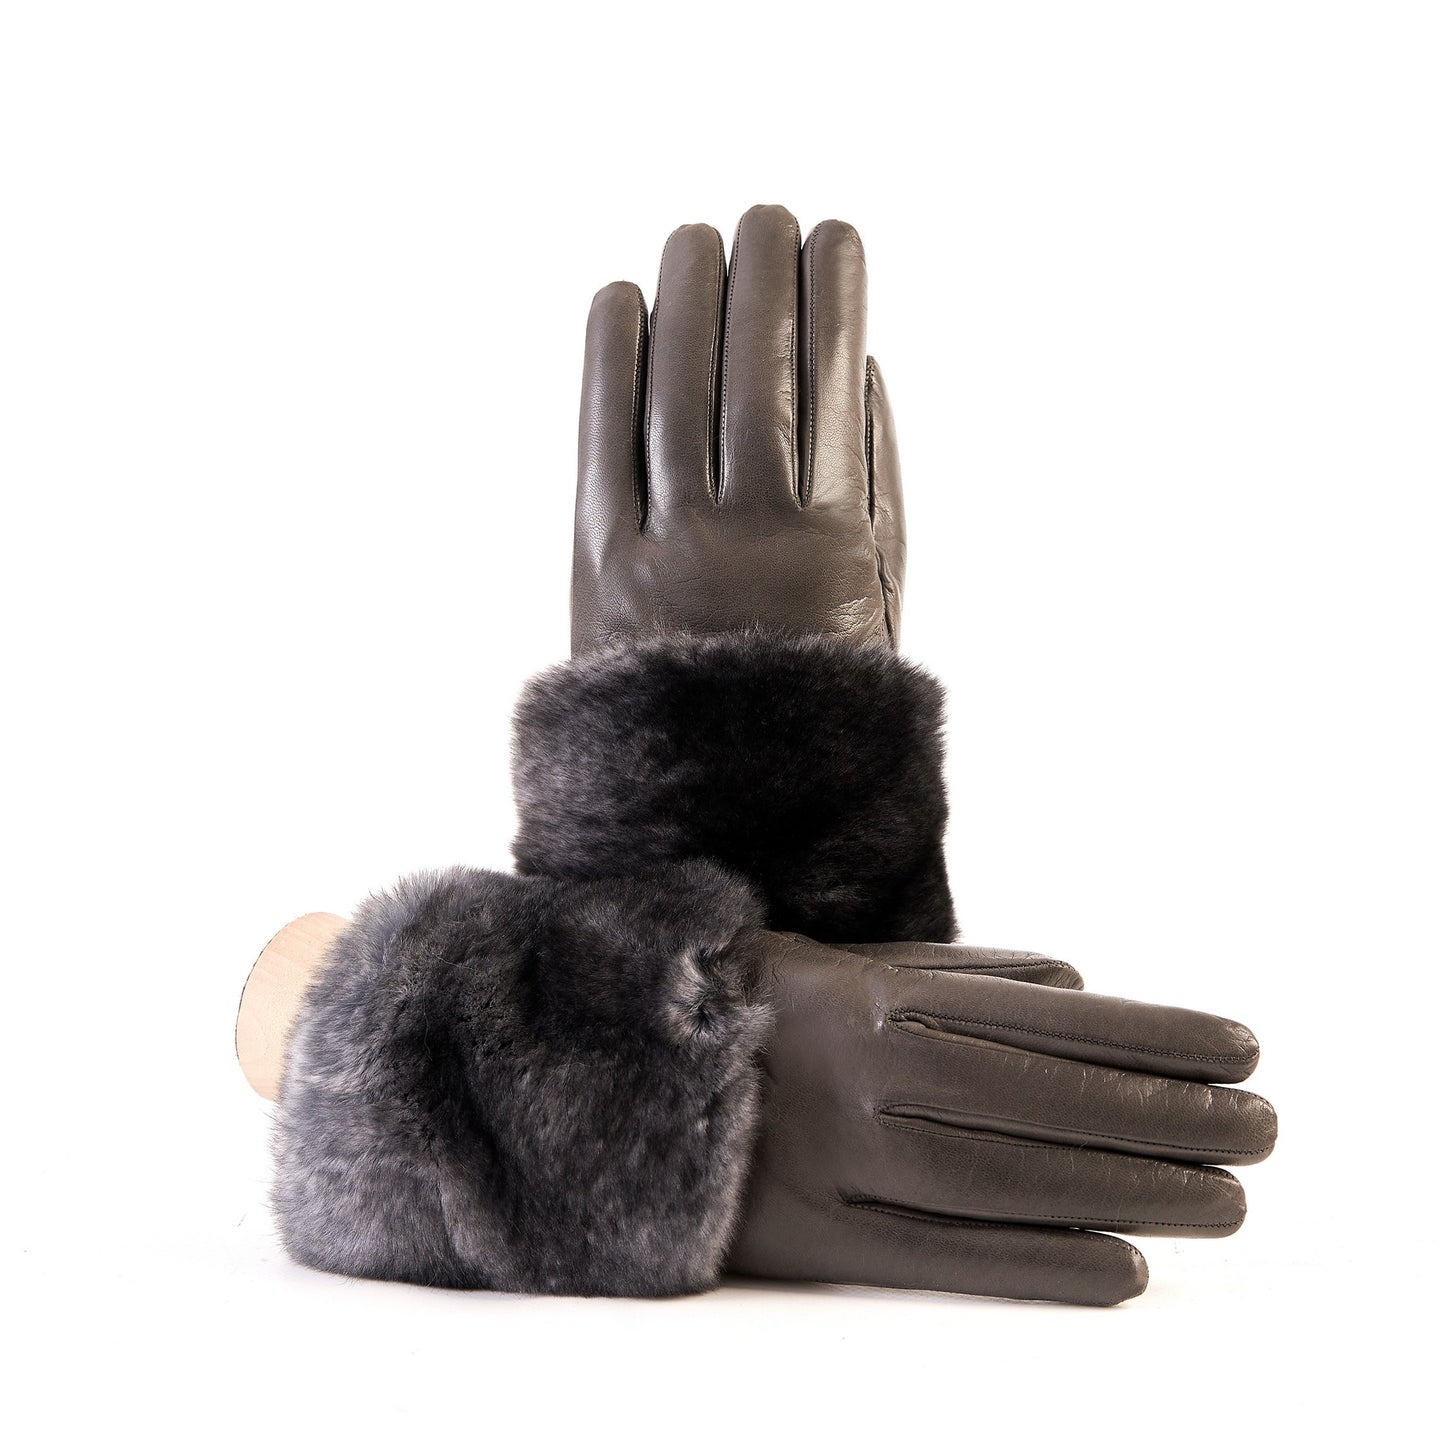 Women's mud nappa leather gloves with a wide real fur panel on the top and cashmere lined